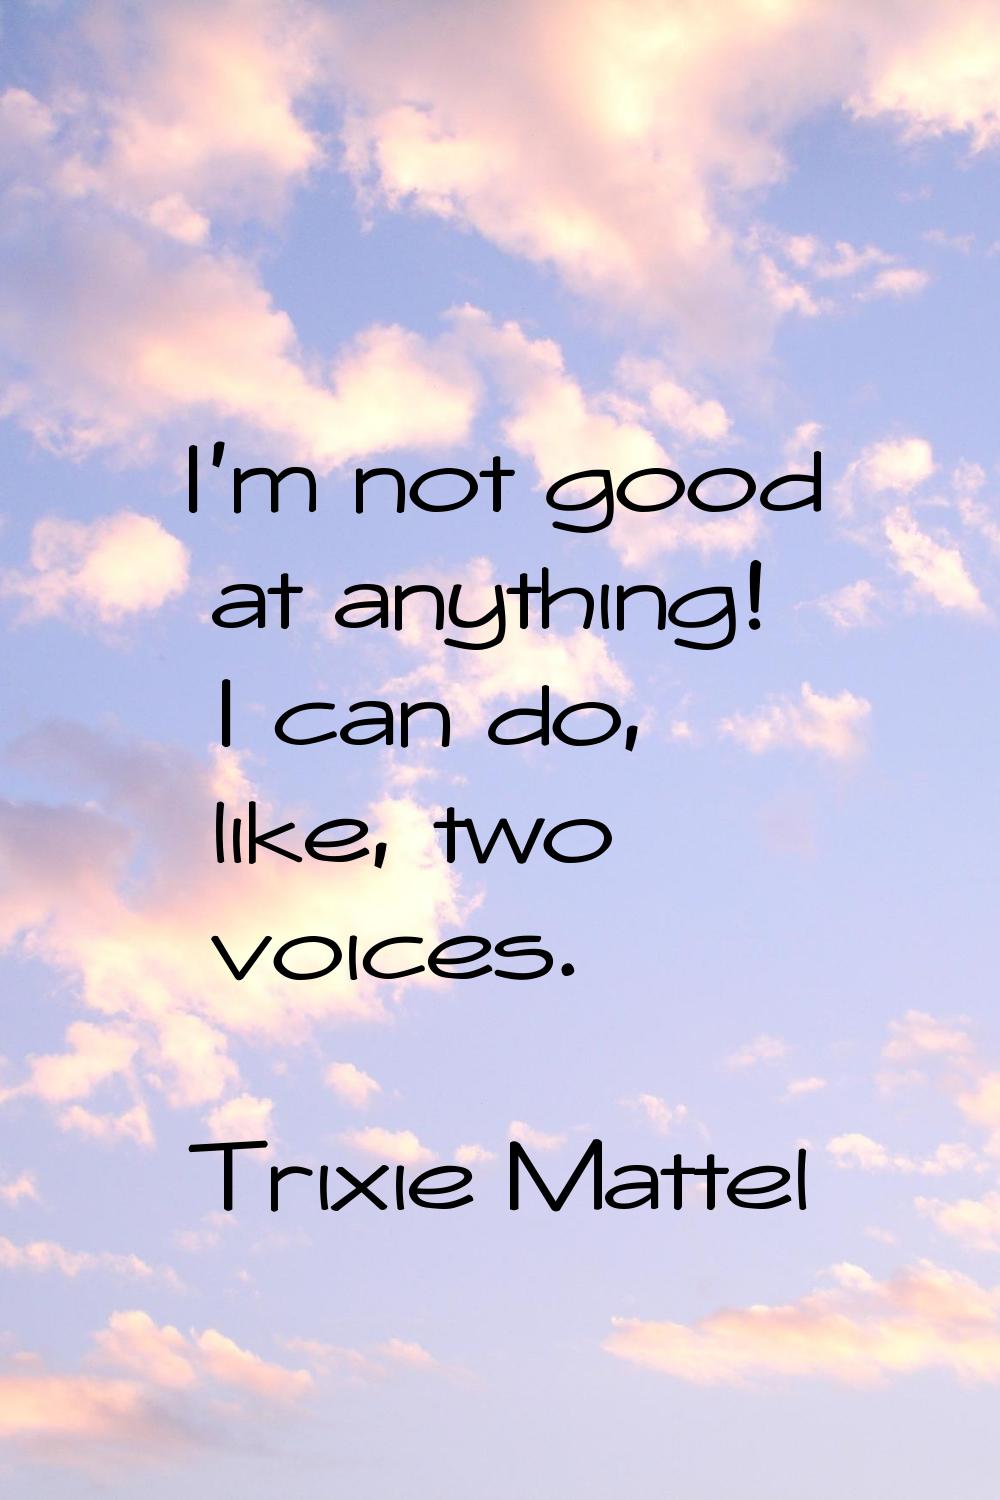 I'm not good at anything! I can do, like, two voices.